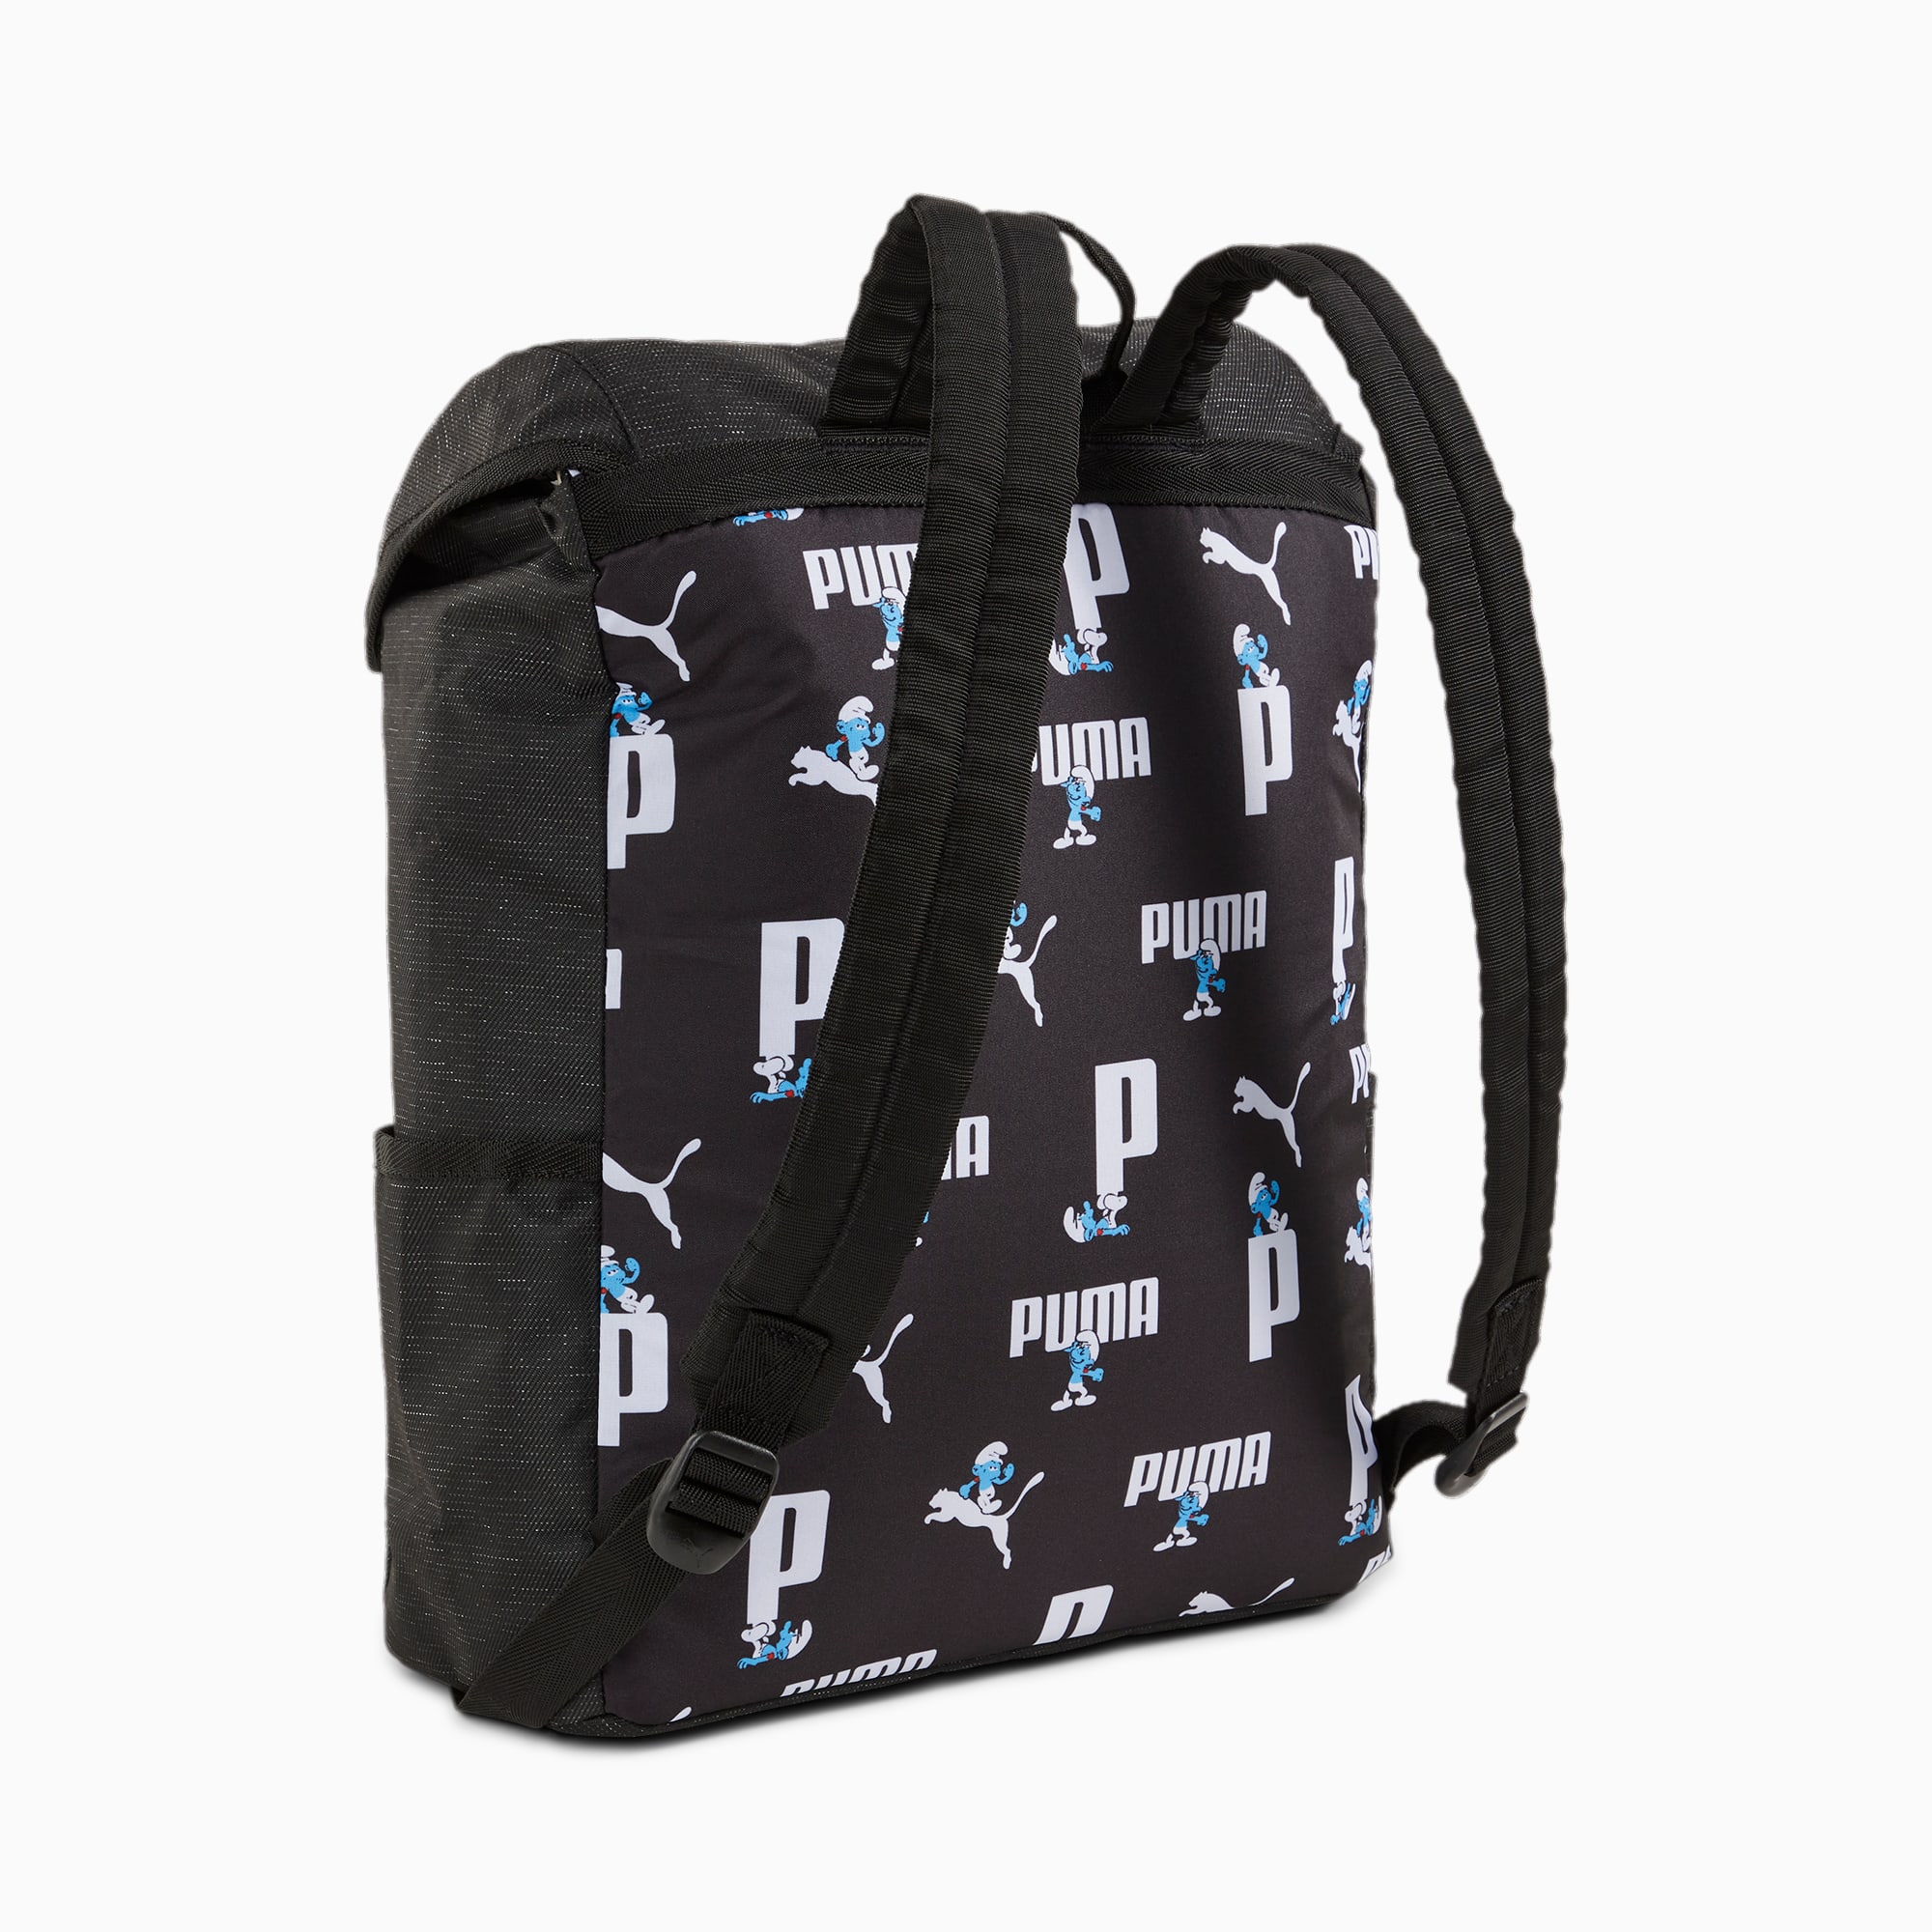 Women's PUMA X The Smurfs Backpack, Black, Accessories